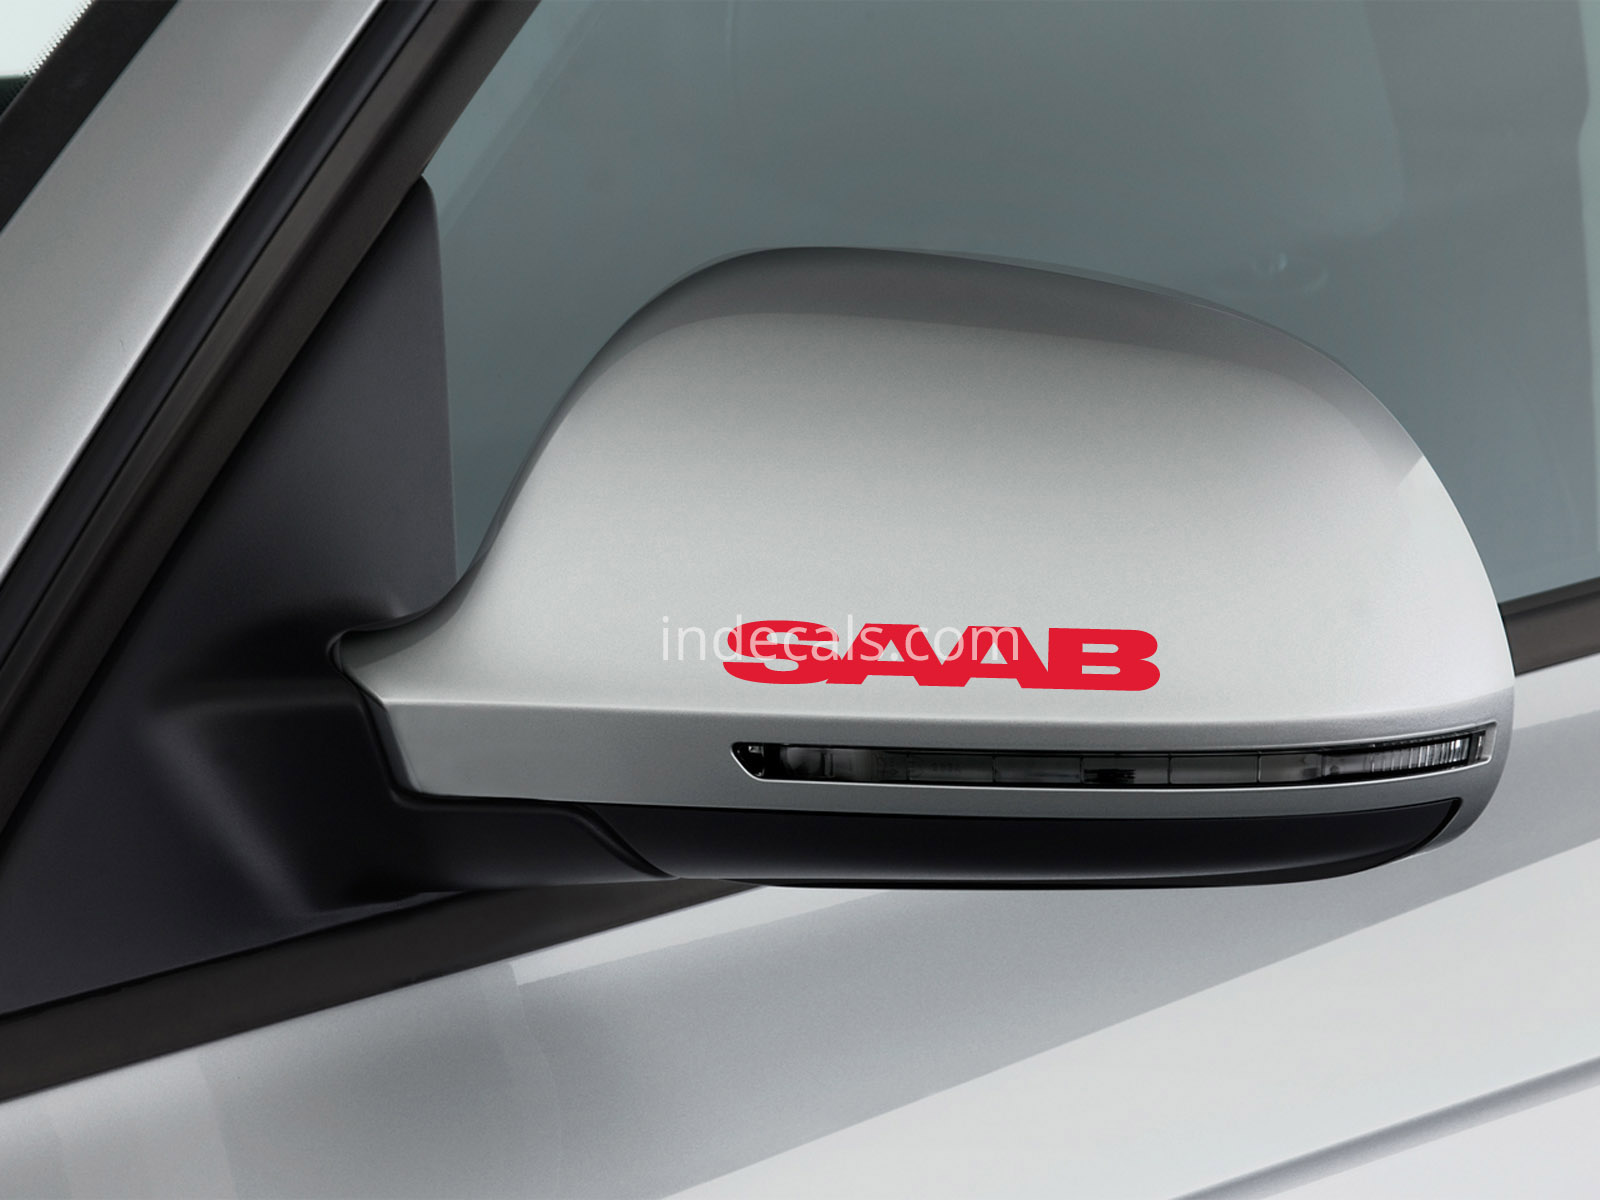 3 x Saab Stickers for Mirrors - Red